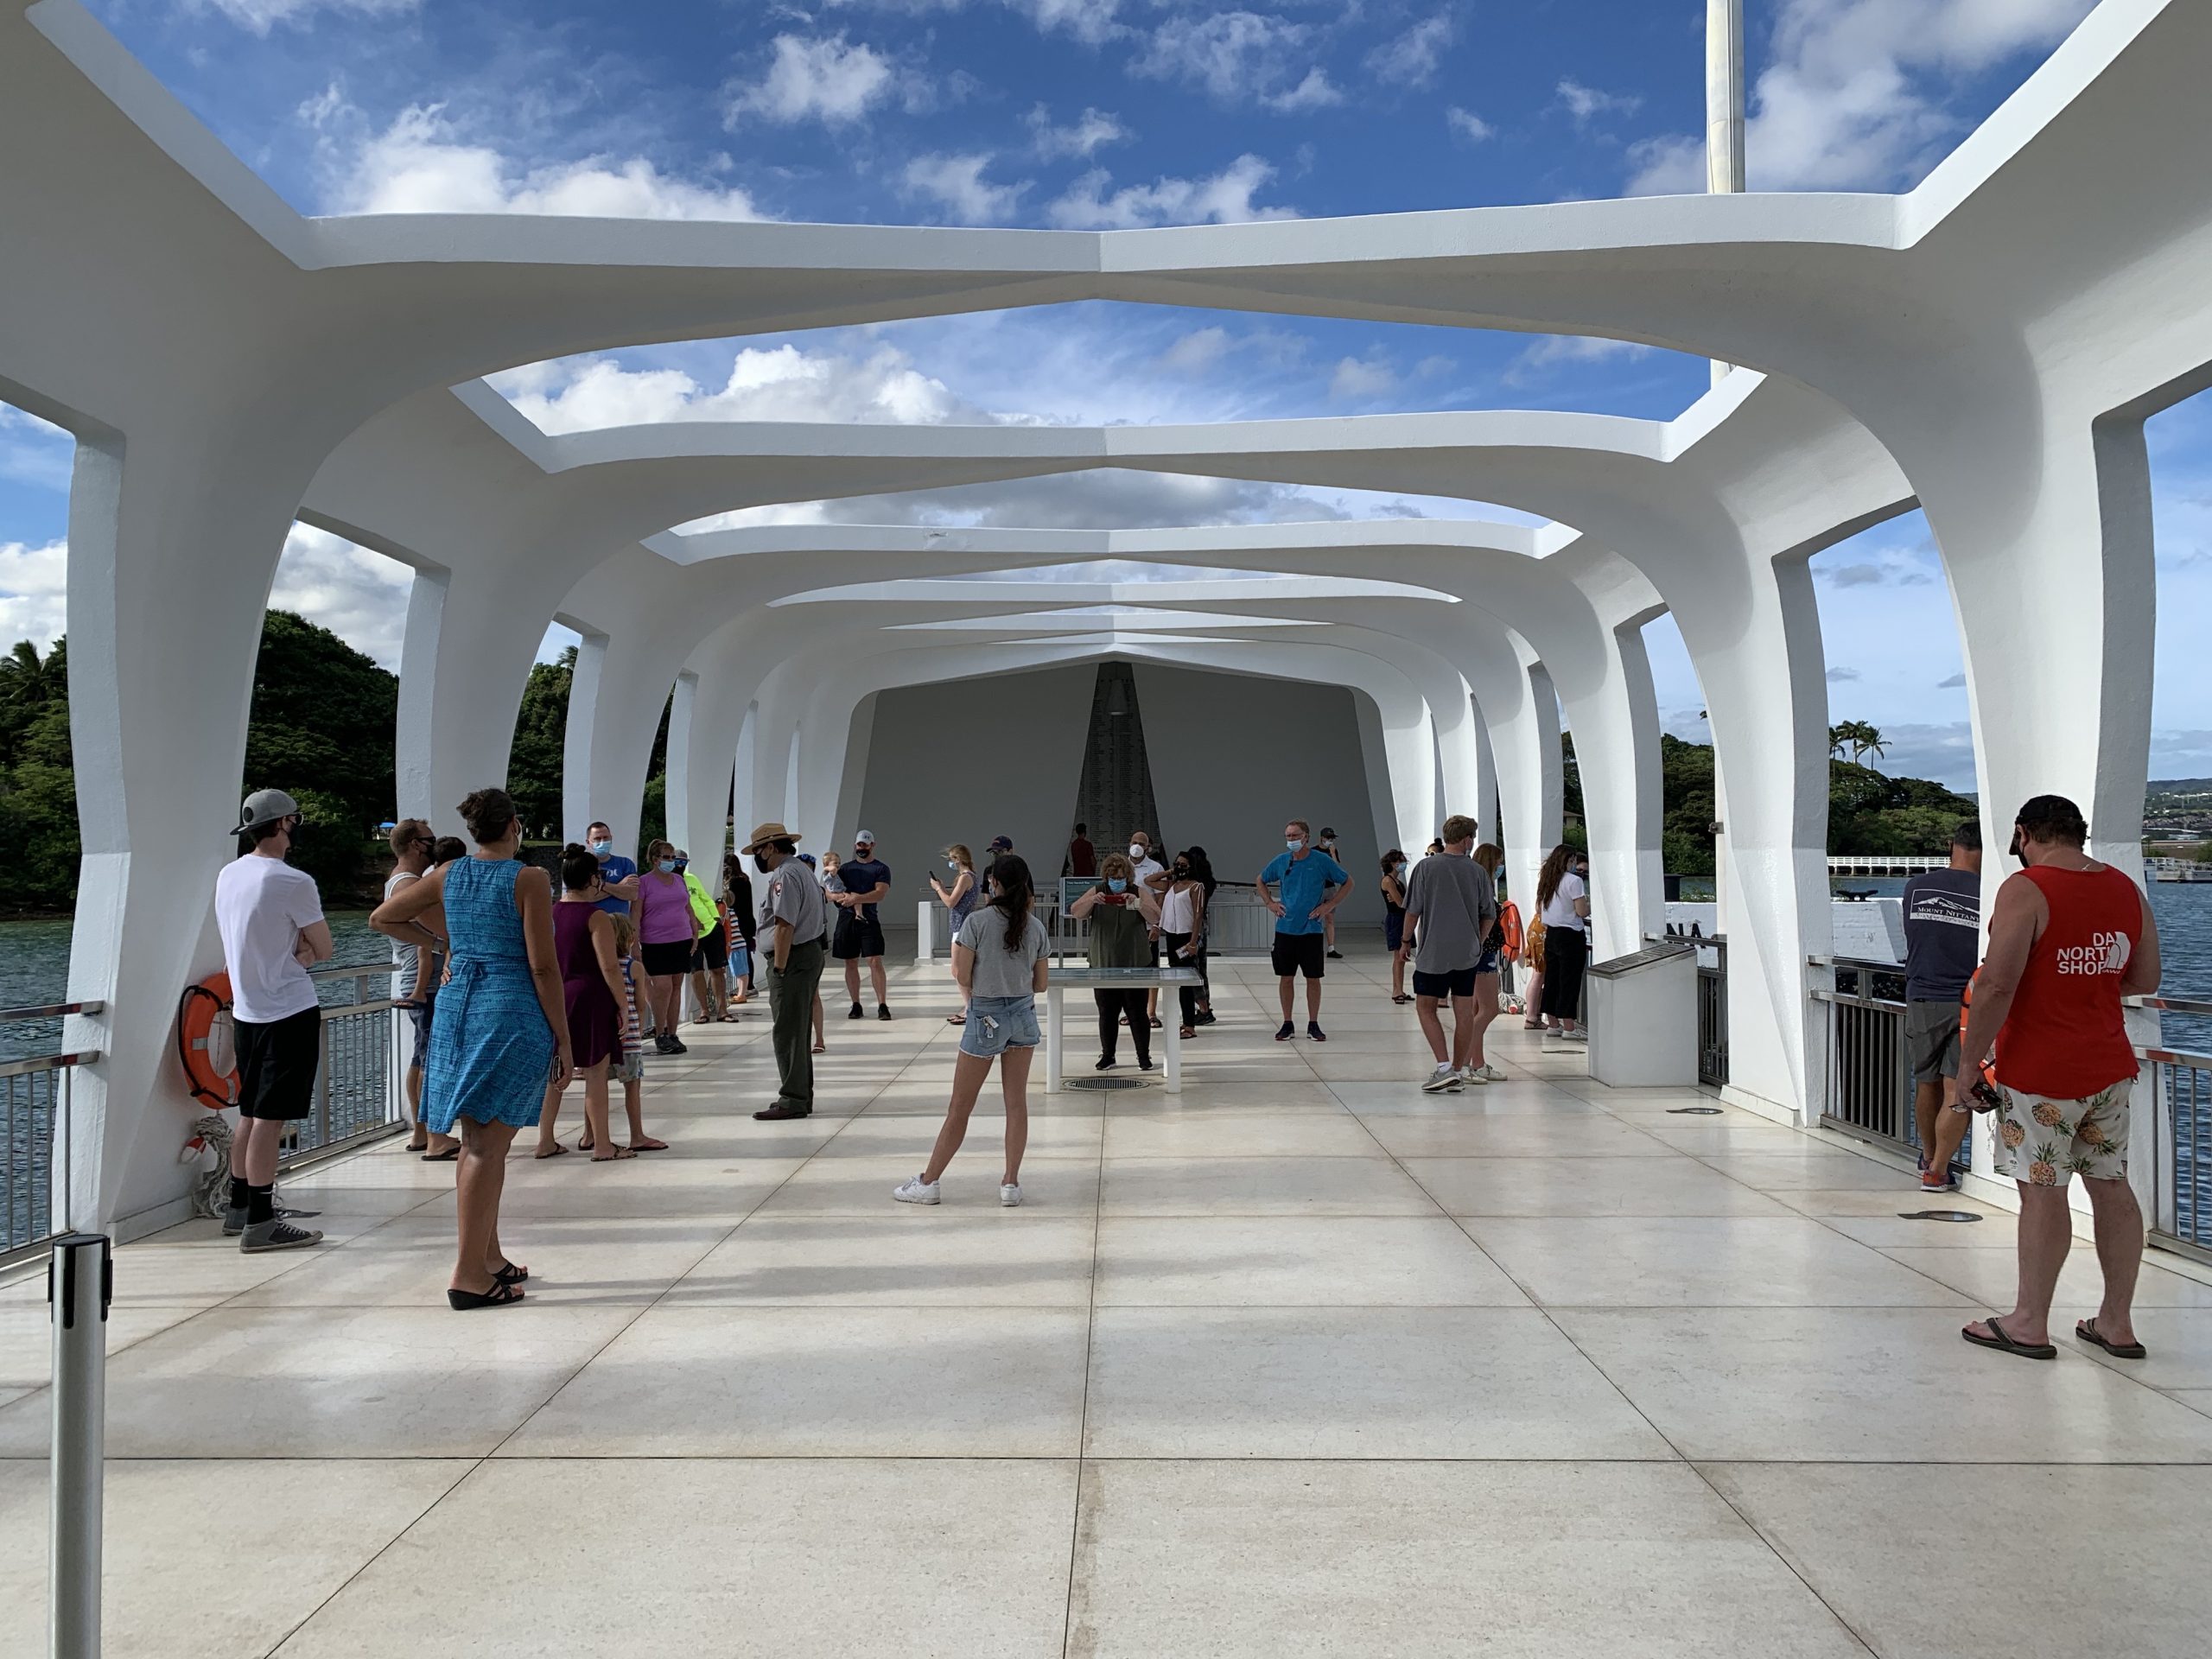 Visiting the USS Arizona, is an ‘EXPERIENCE’